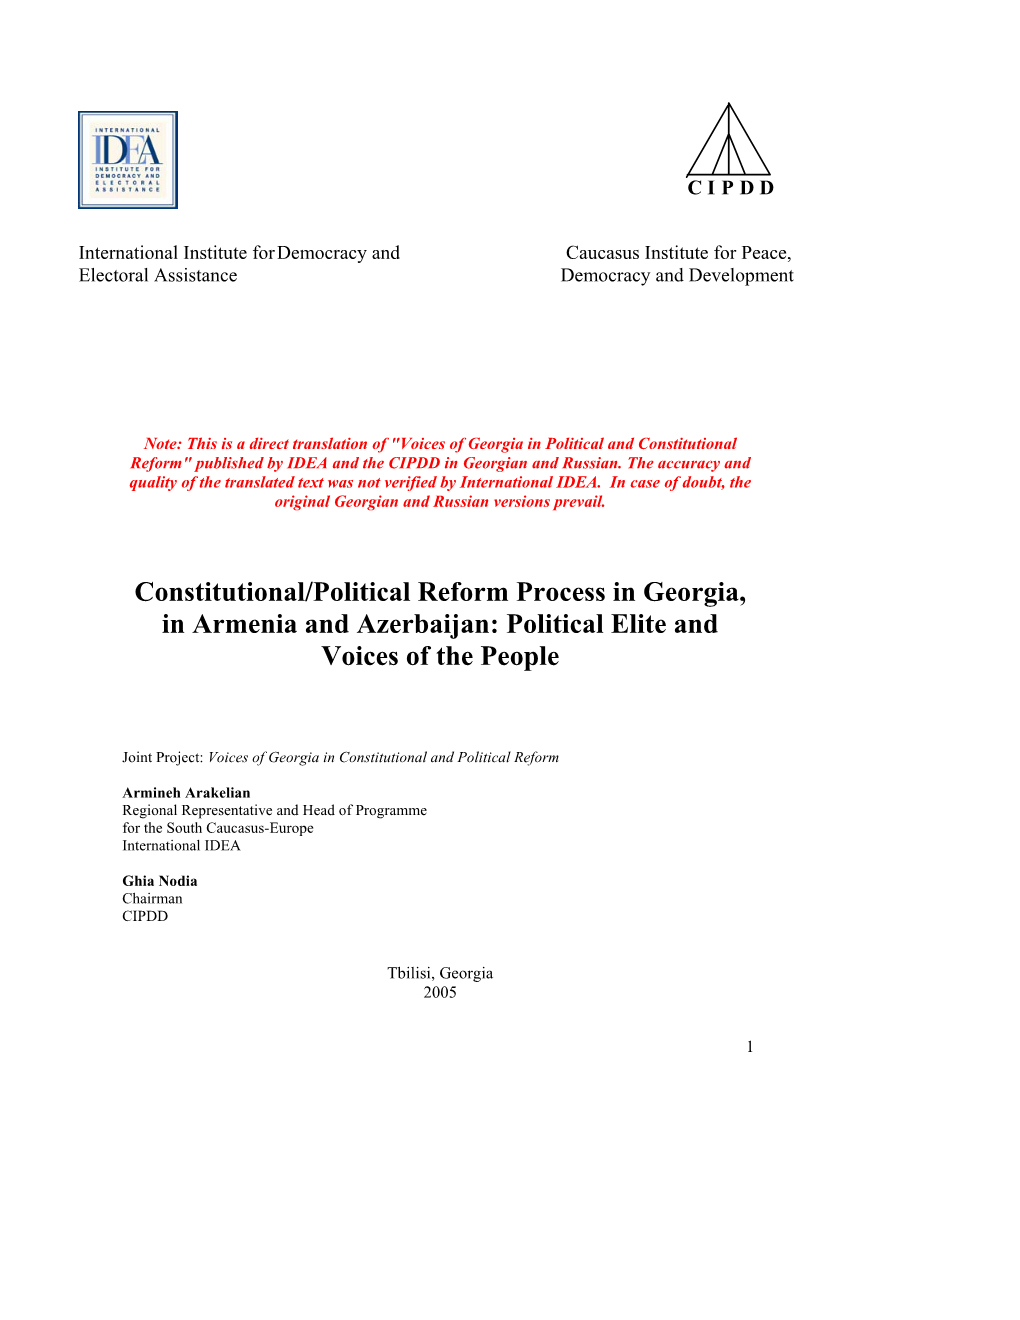 Constitutional/Political Reform Process in Georgia, in Armenia and Azerbaijan: Political Elite and Voices of the People